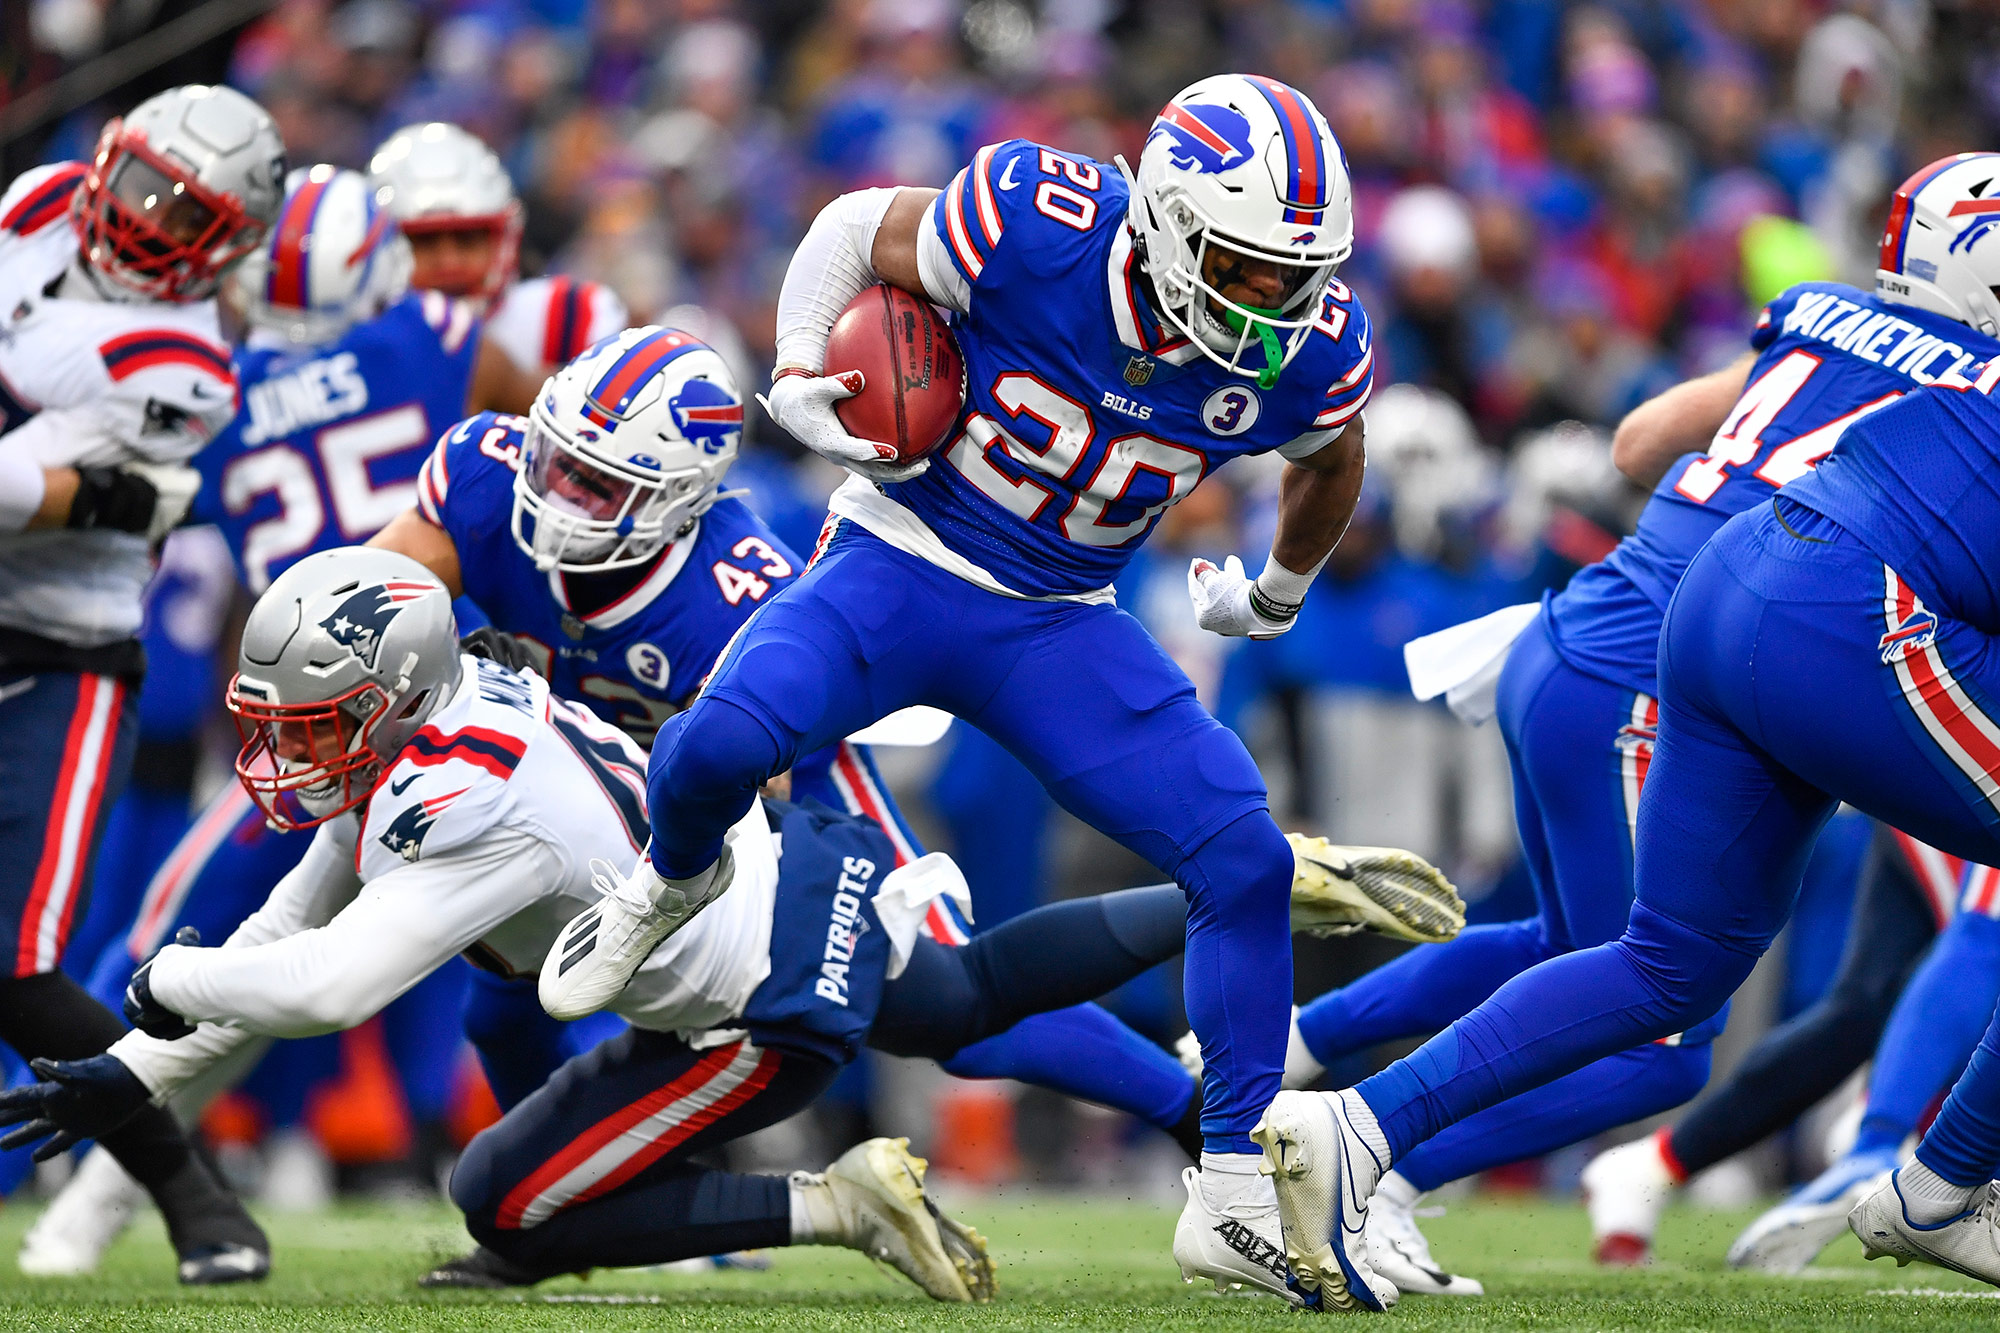 Buffalo Bills running back Nyheim Hines scores a touchdown on a kickoff return in the first half of Sunday's game against the New England Patriots. 